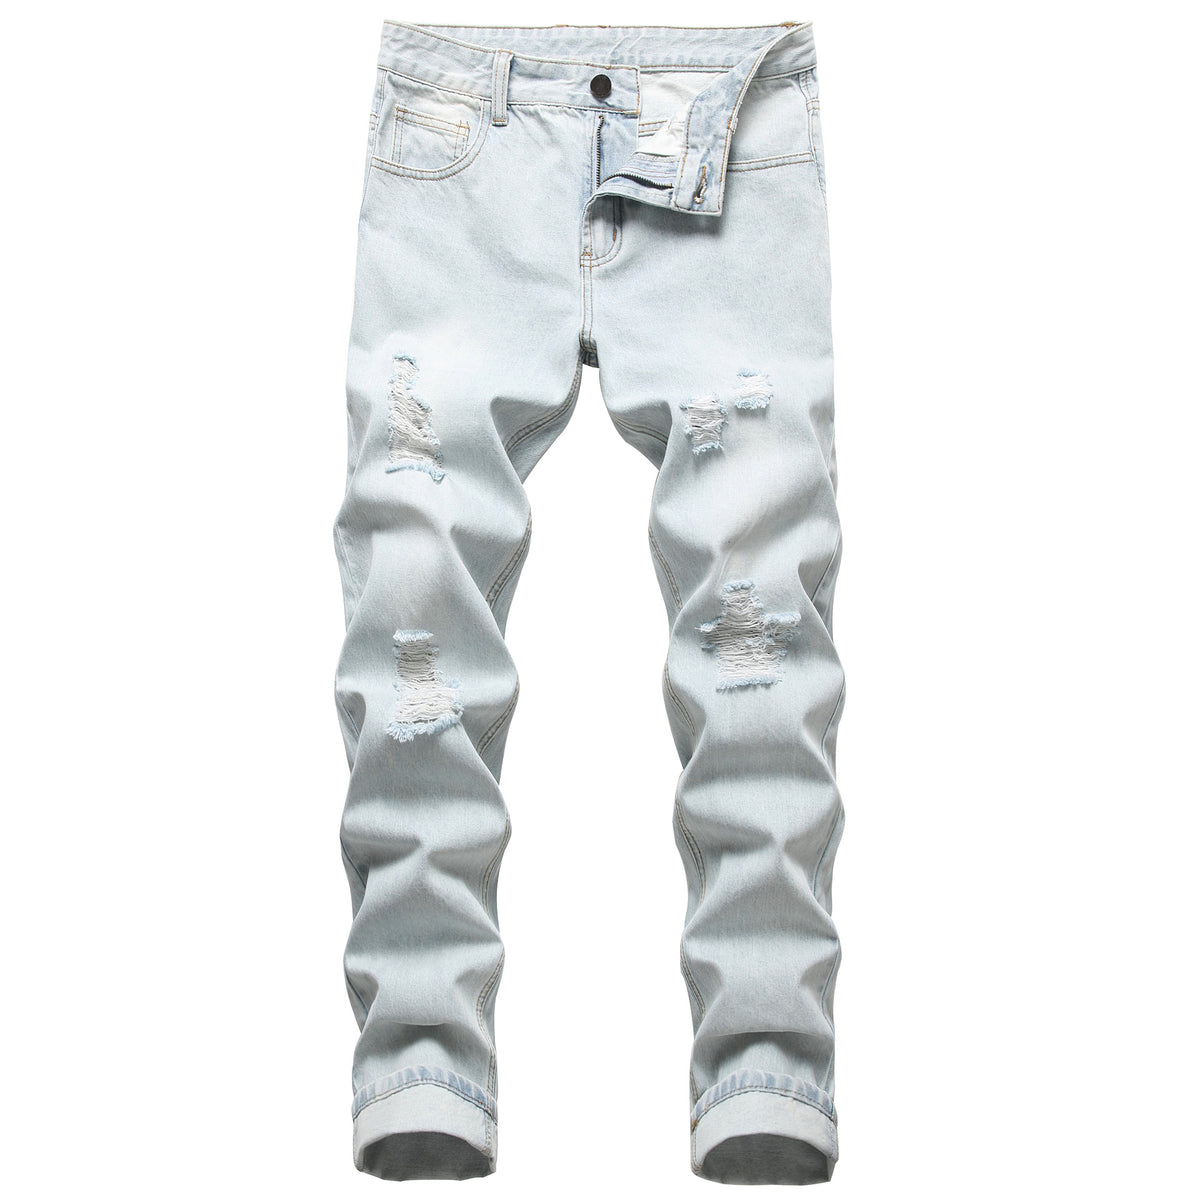 Men's blue patch ripped jeans